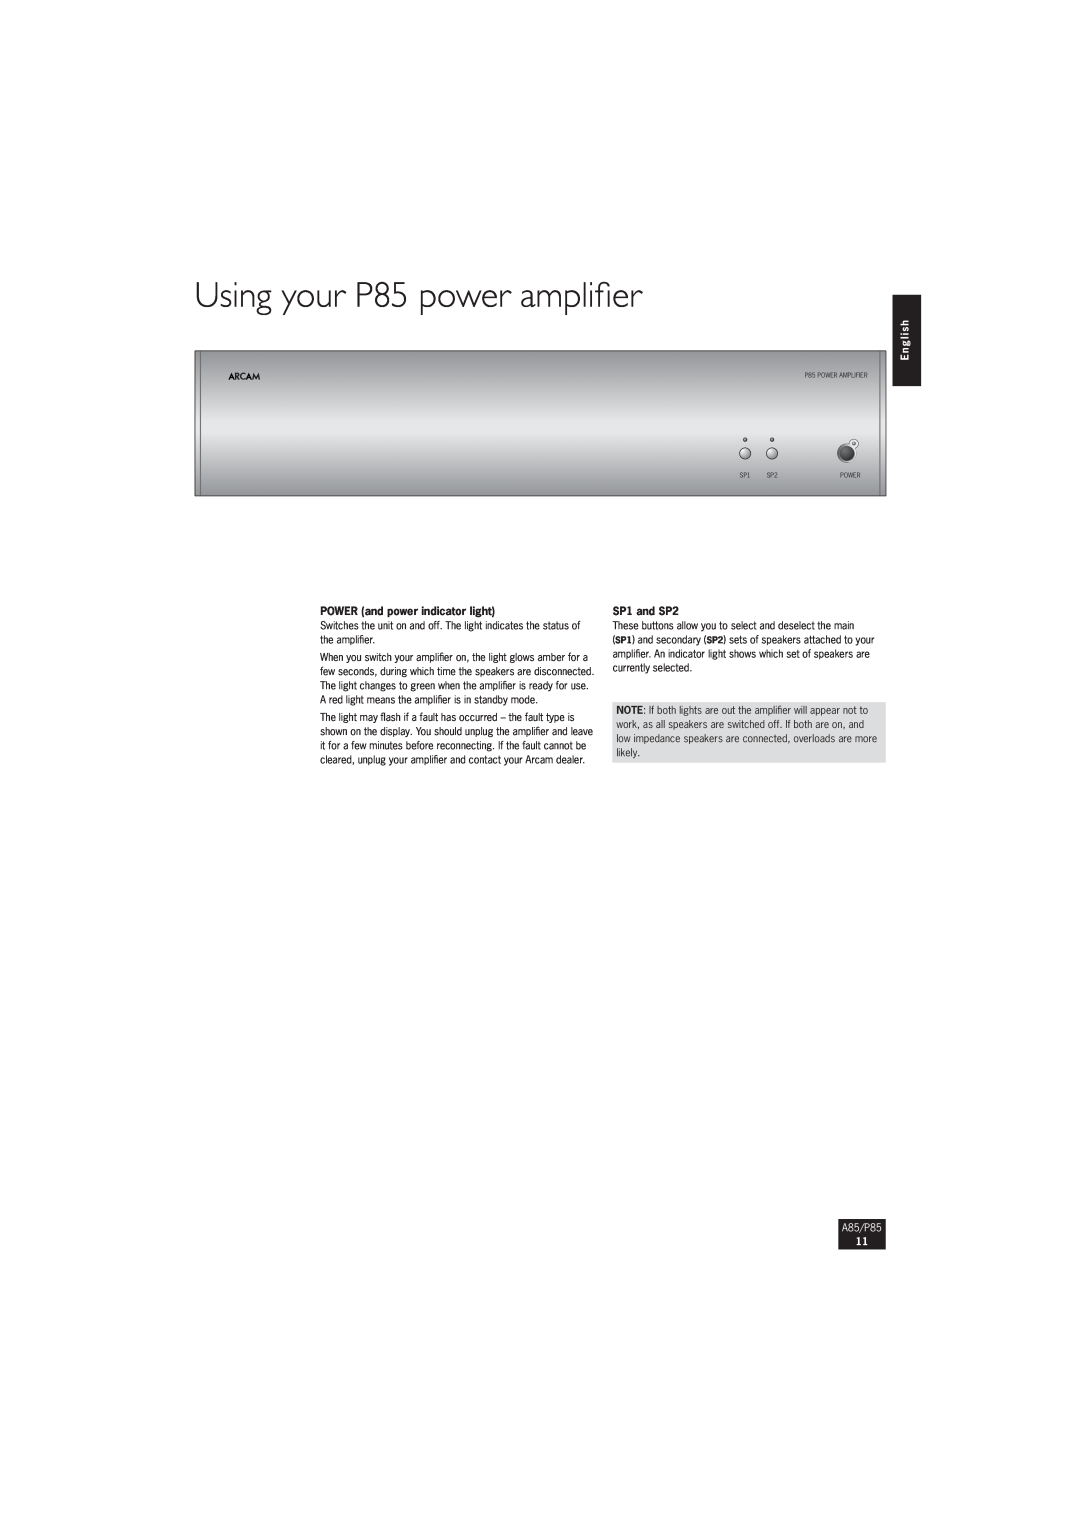 Arcam P85/3 manual Using your P85 power ampliﬁer, E n g l i s h, POWER and power indicator light, SP1 and SP2, A85/P85 